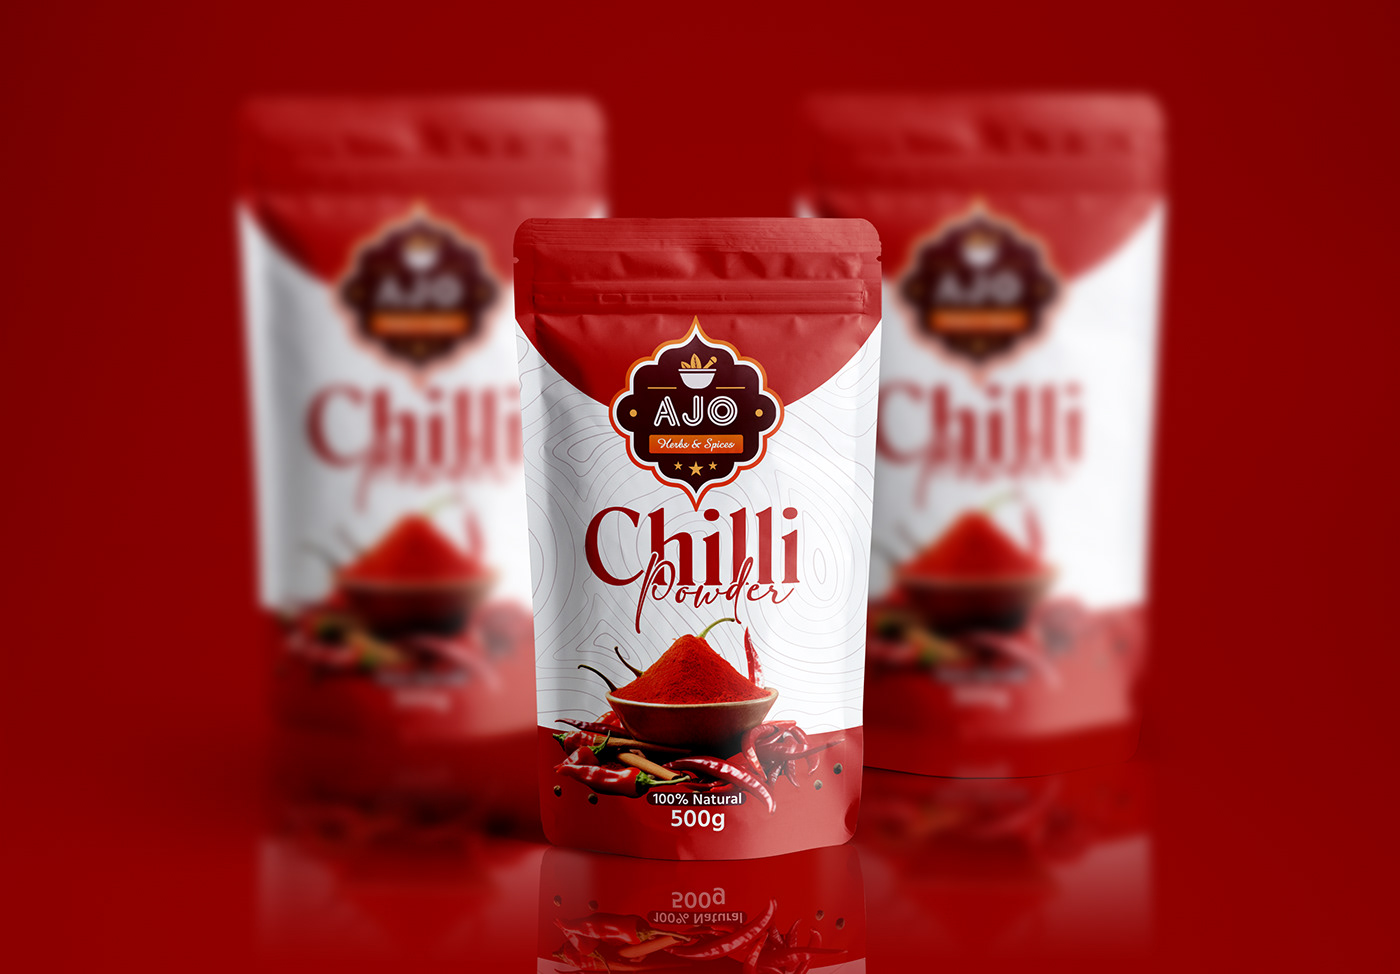 chilli powder product packaging design Graphic Designer chilli label deisgn chilli packaging deisgn Chilli Pouch Design chilli powder packaging new pouch label deisgn Chilli label Design